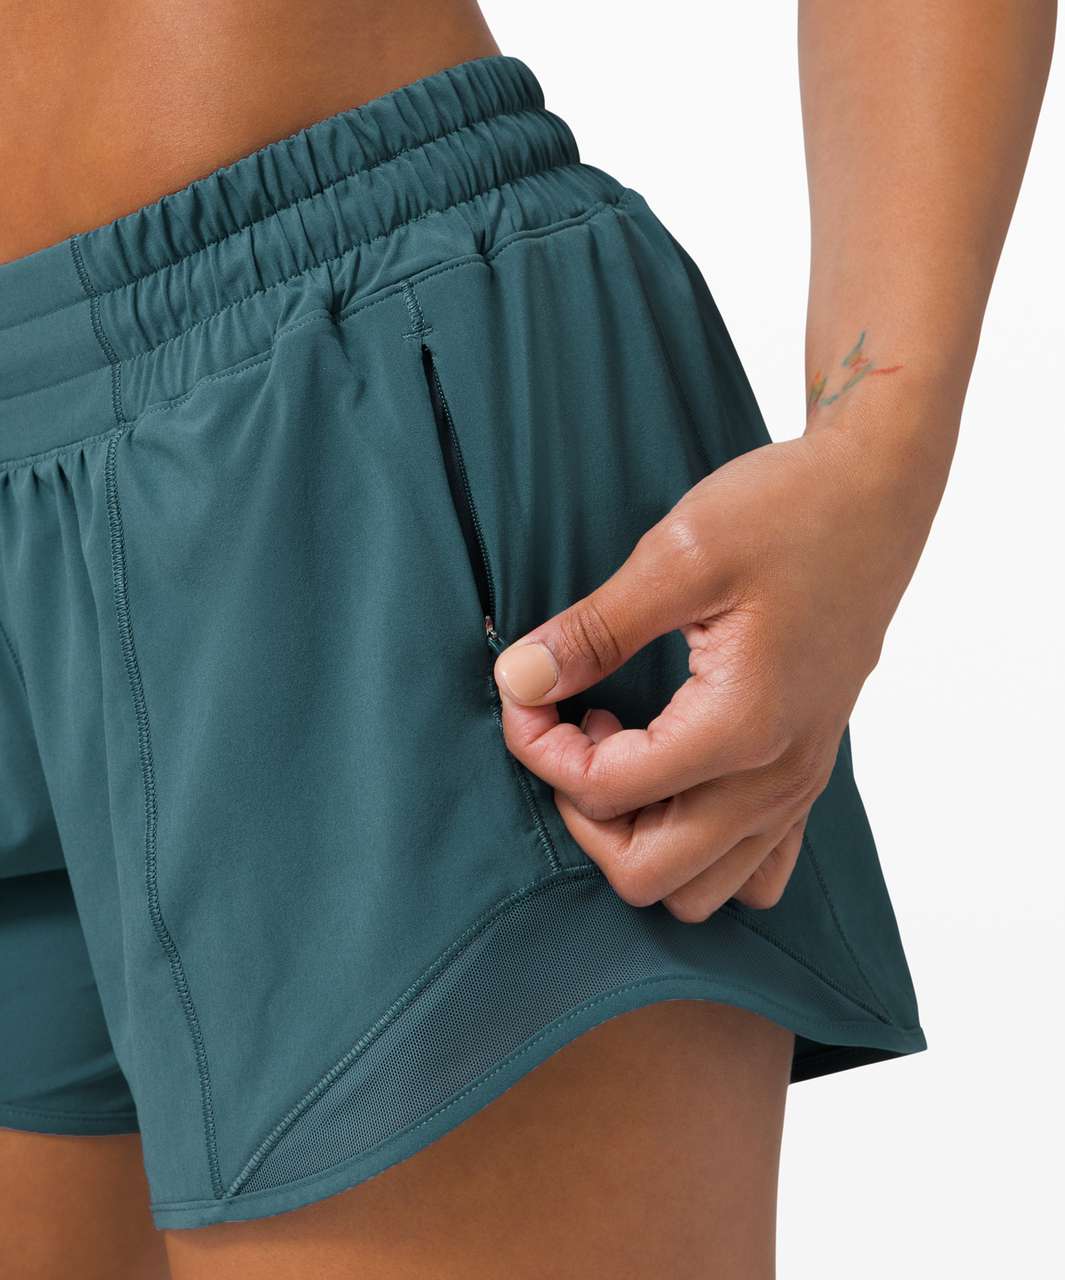 Aerie hot stuff short is a total lulu hotty hot dupe and they have pov